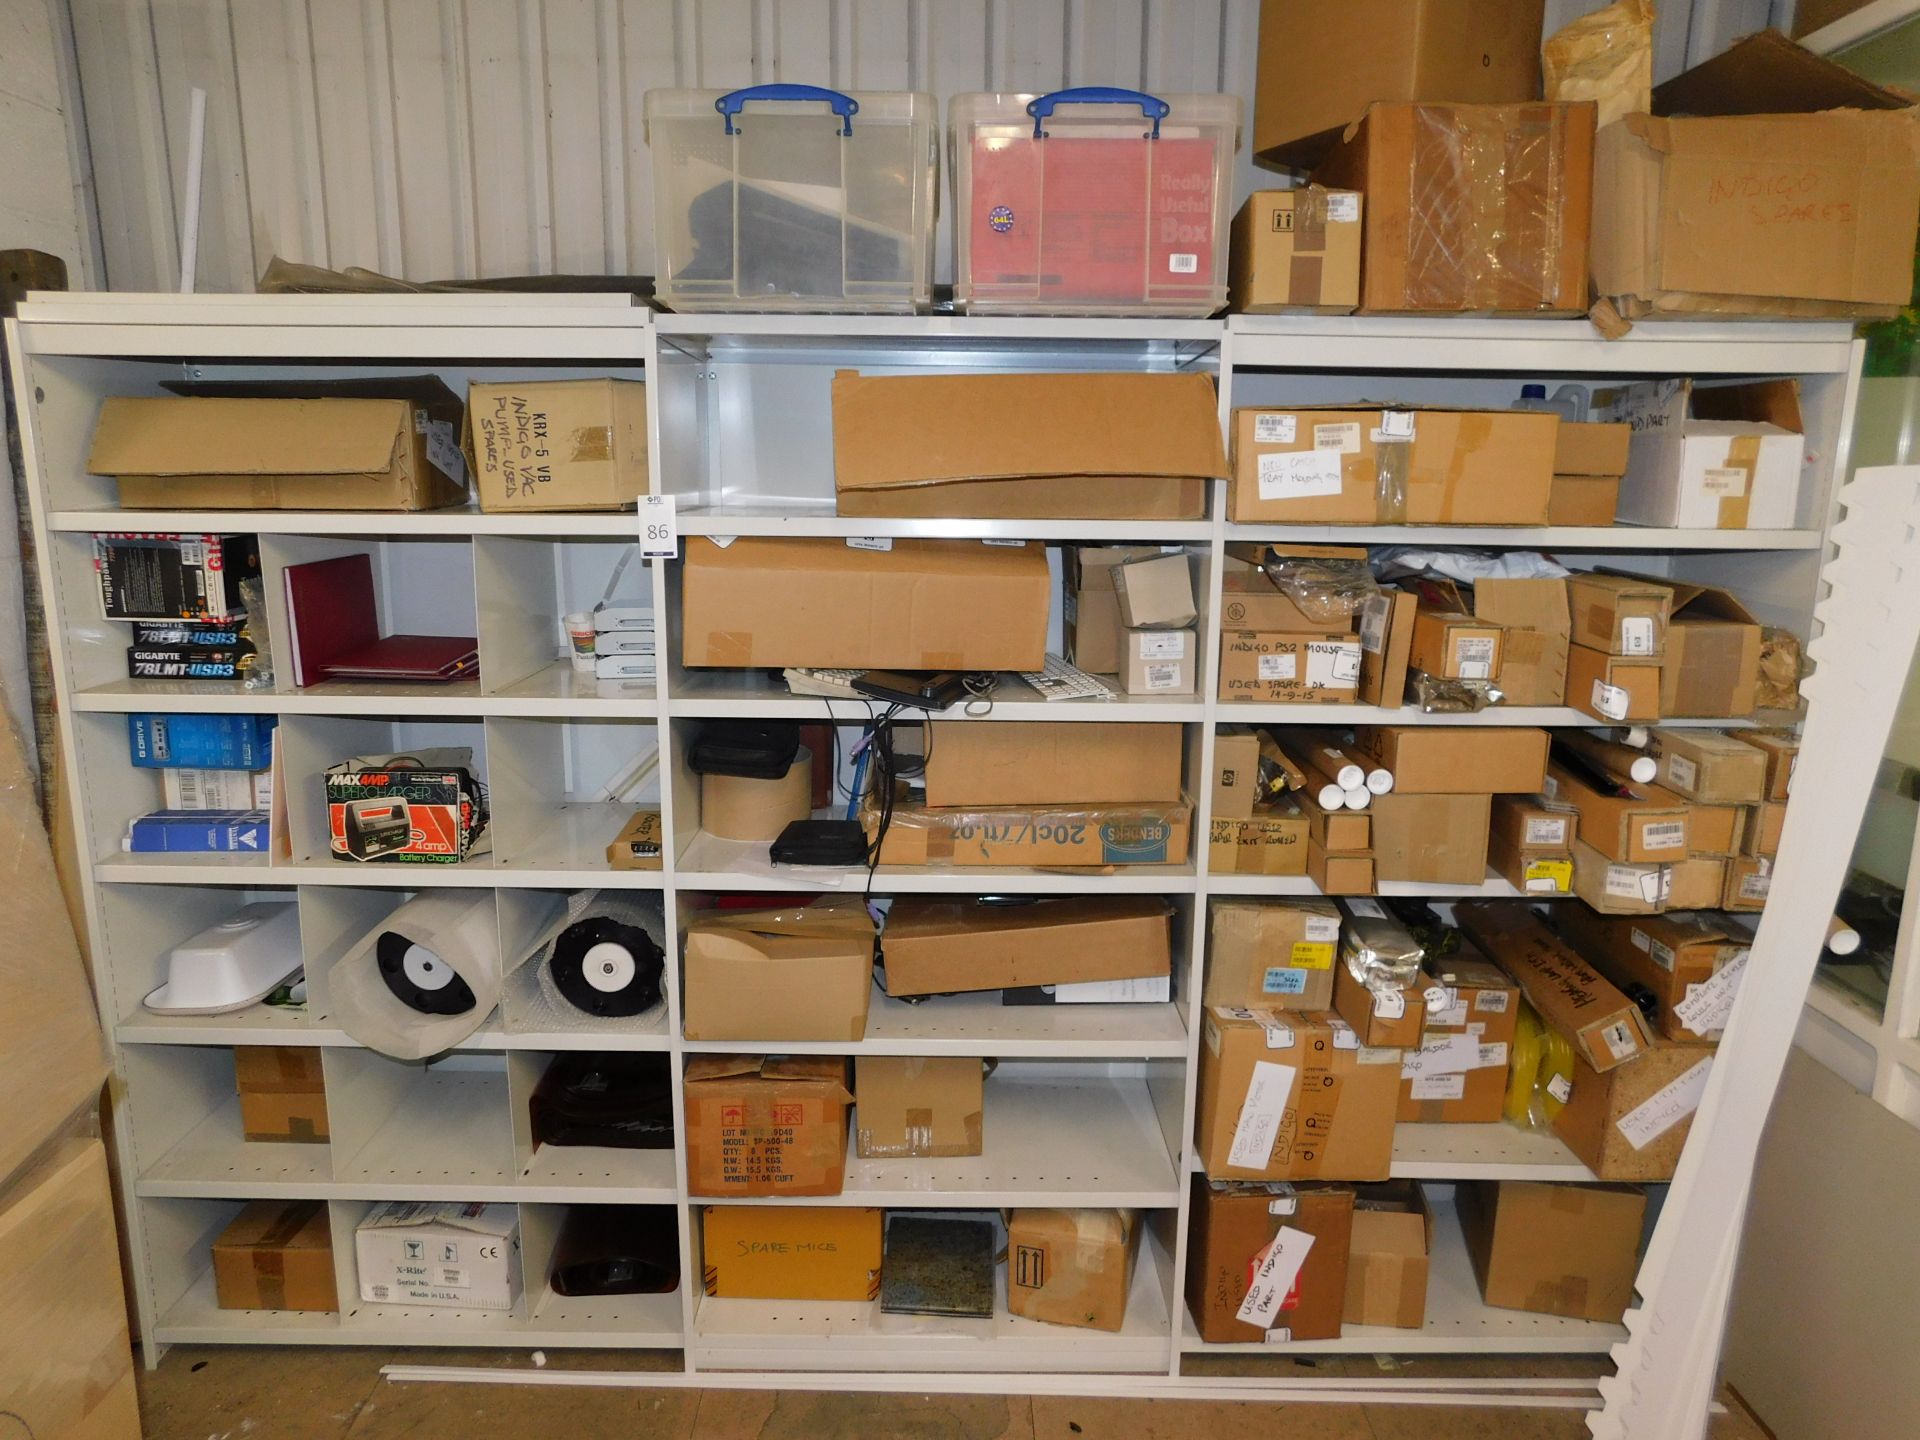 3 Steel Shelving Units & Contents consisting of Mostly Indigo Spare Parts including 2 Drums (Located